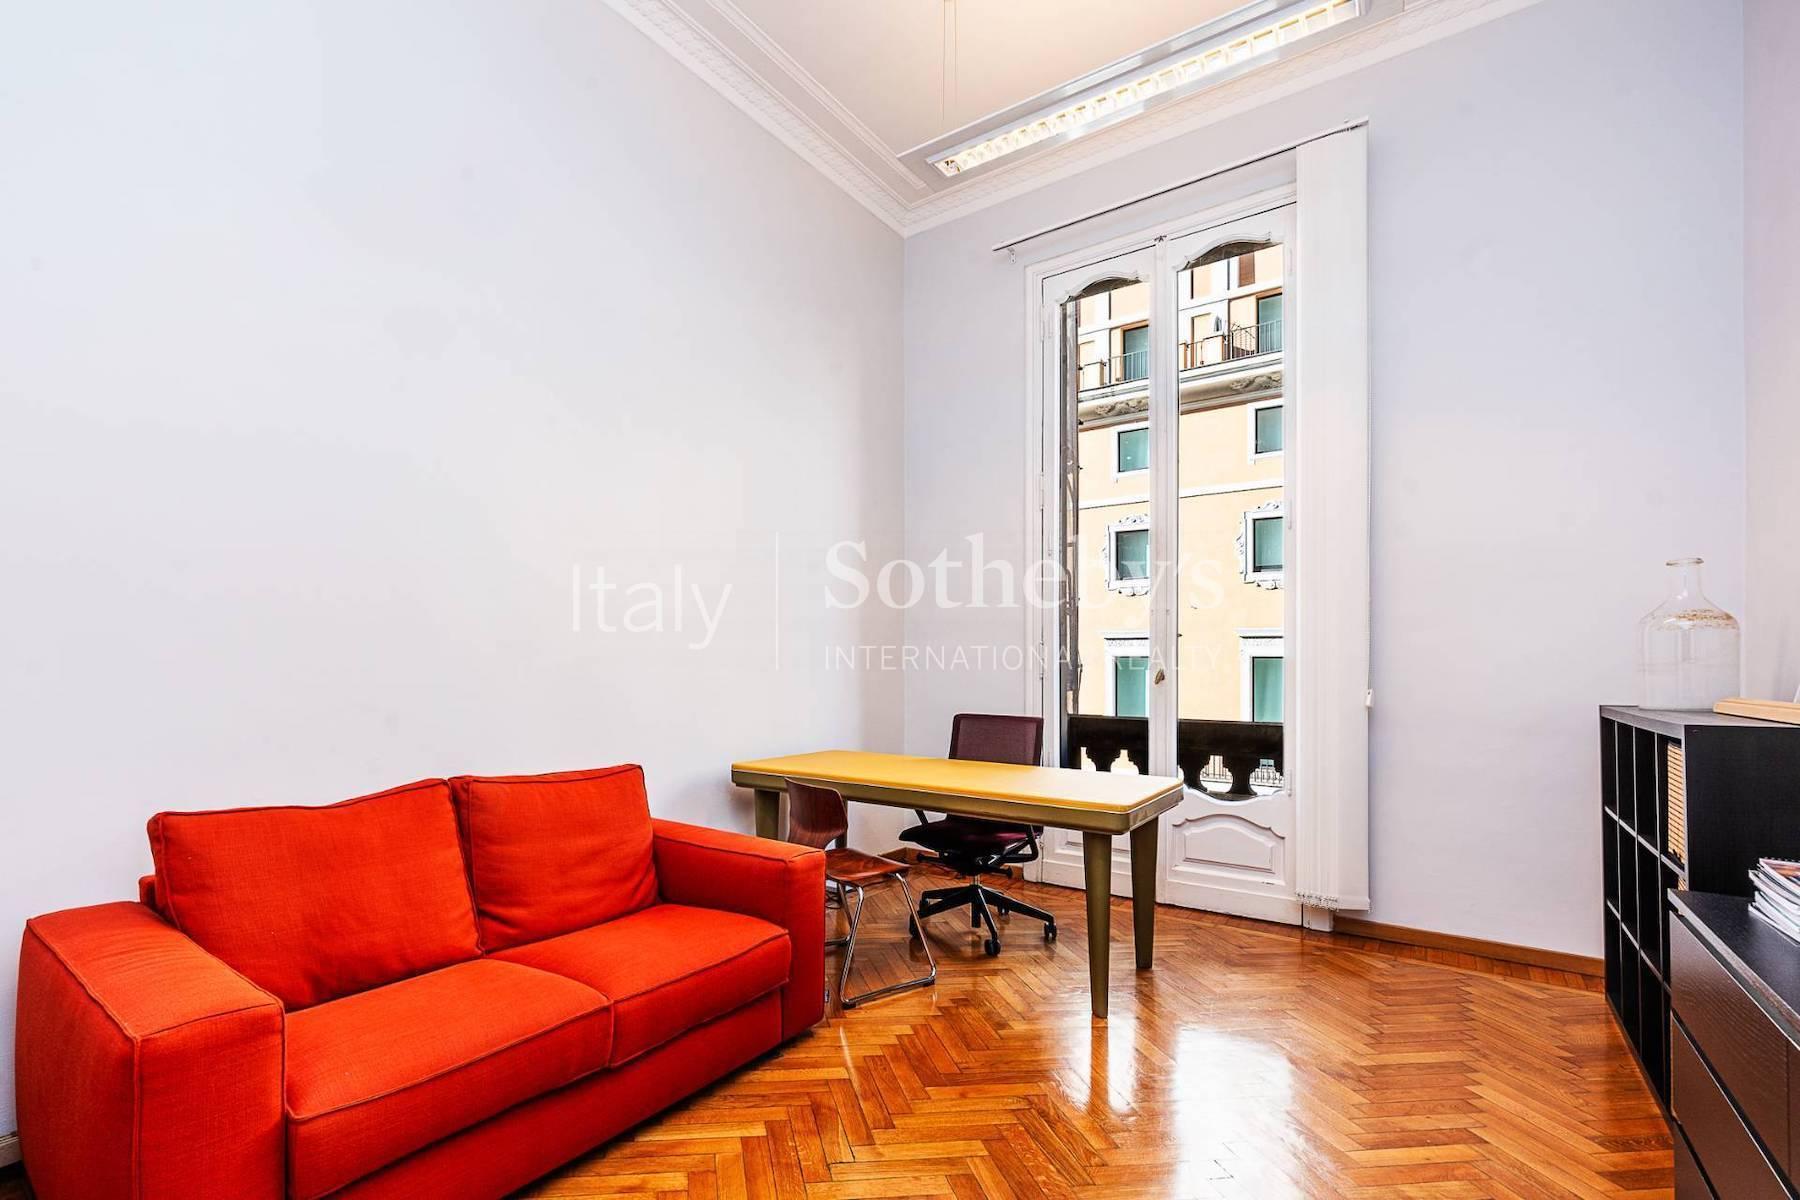 Prestigious office a stone's throw from Piazza Spagna - 11